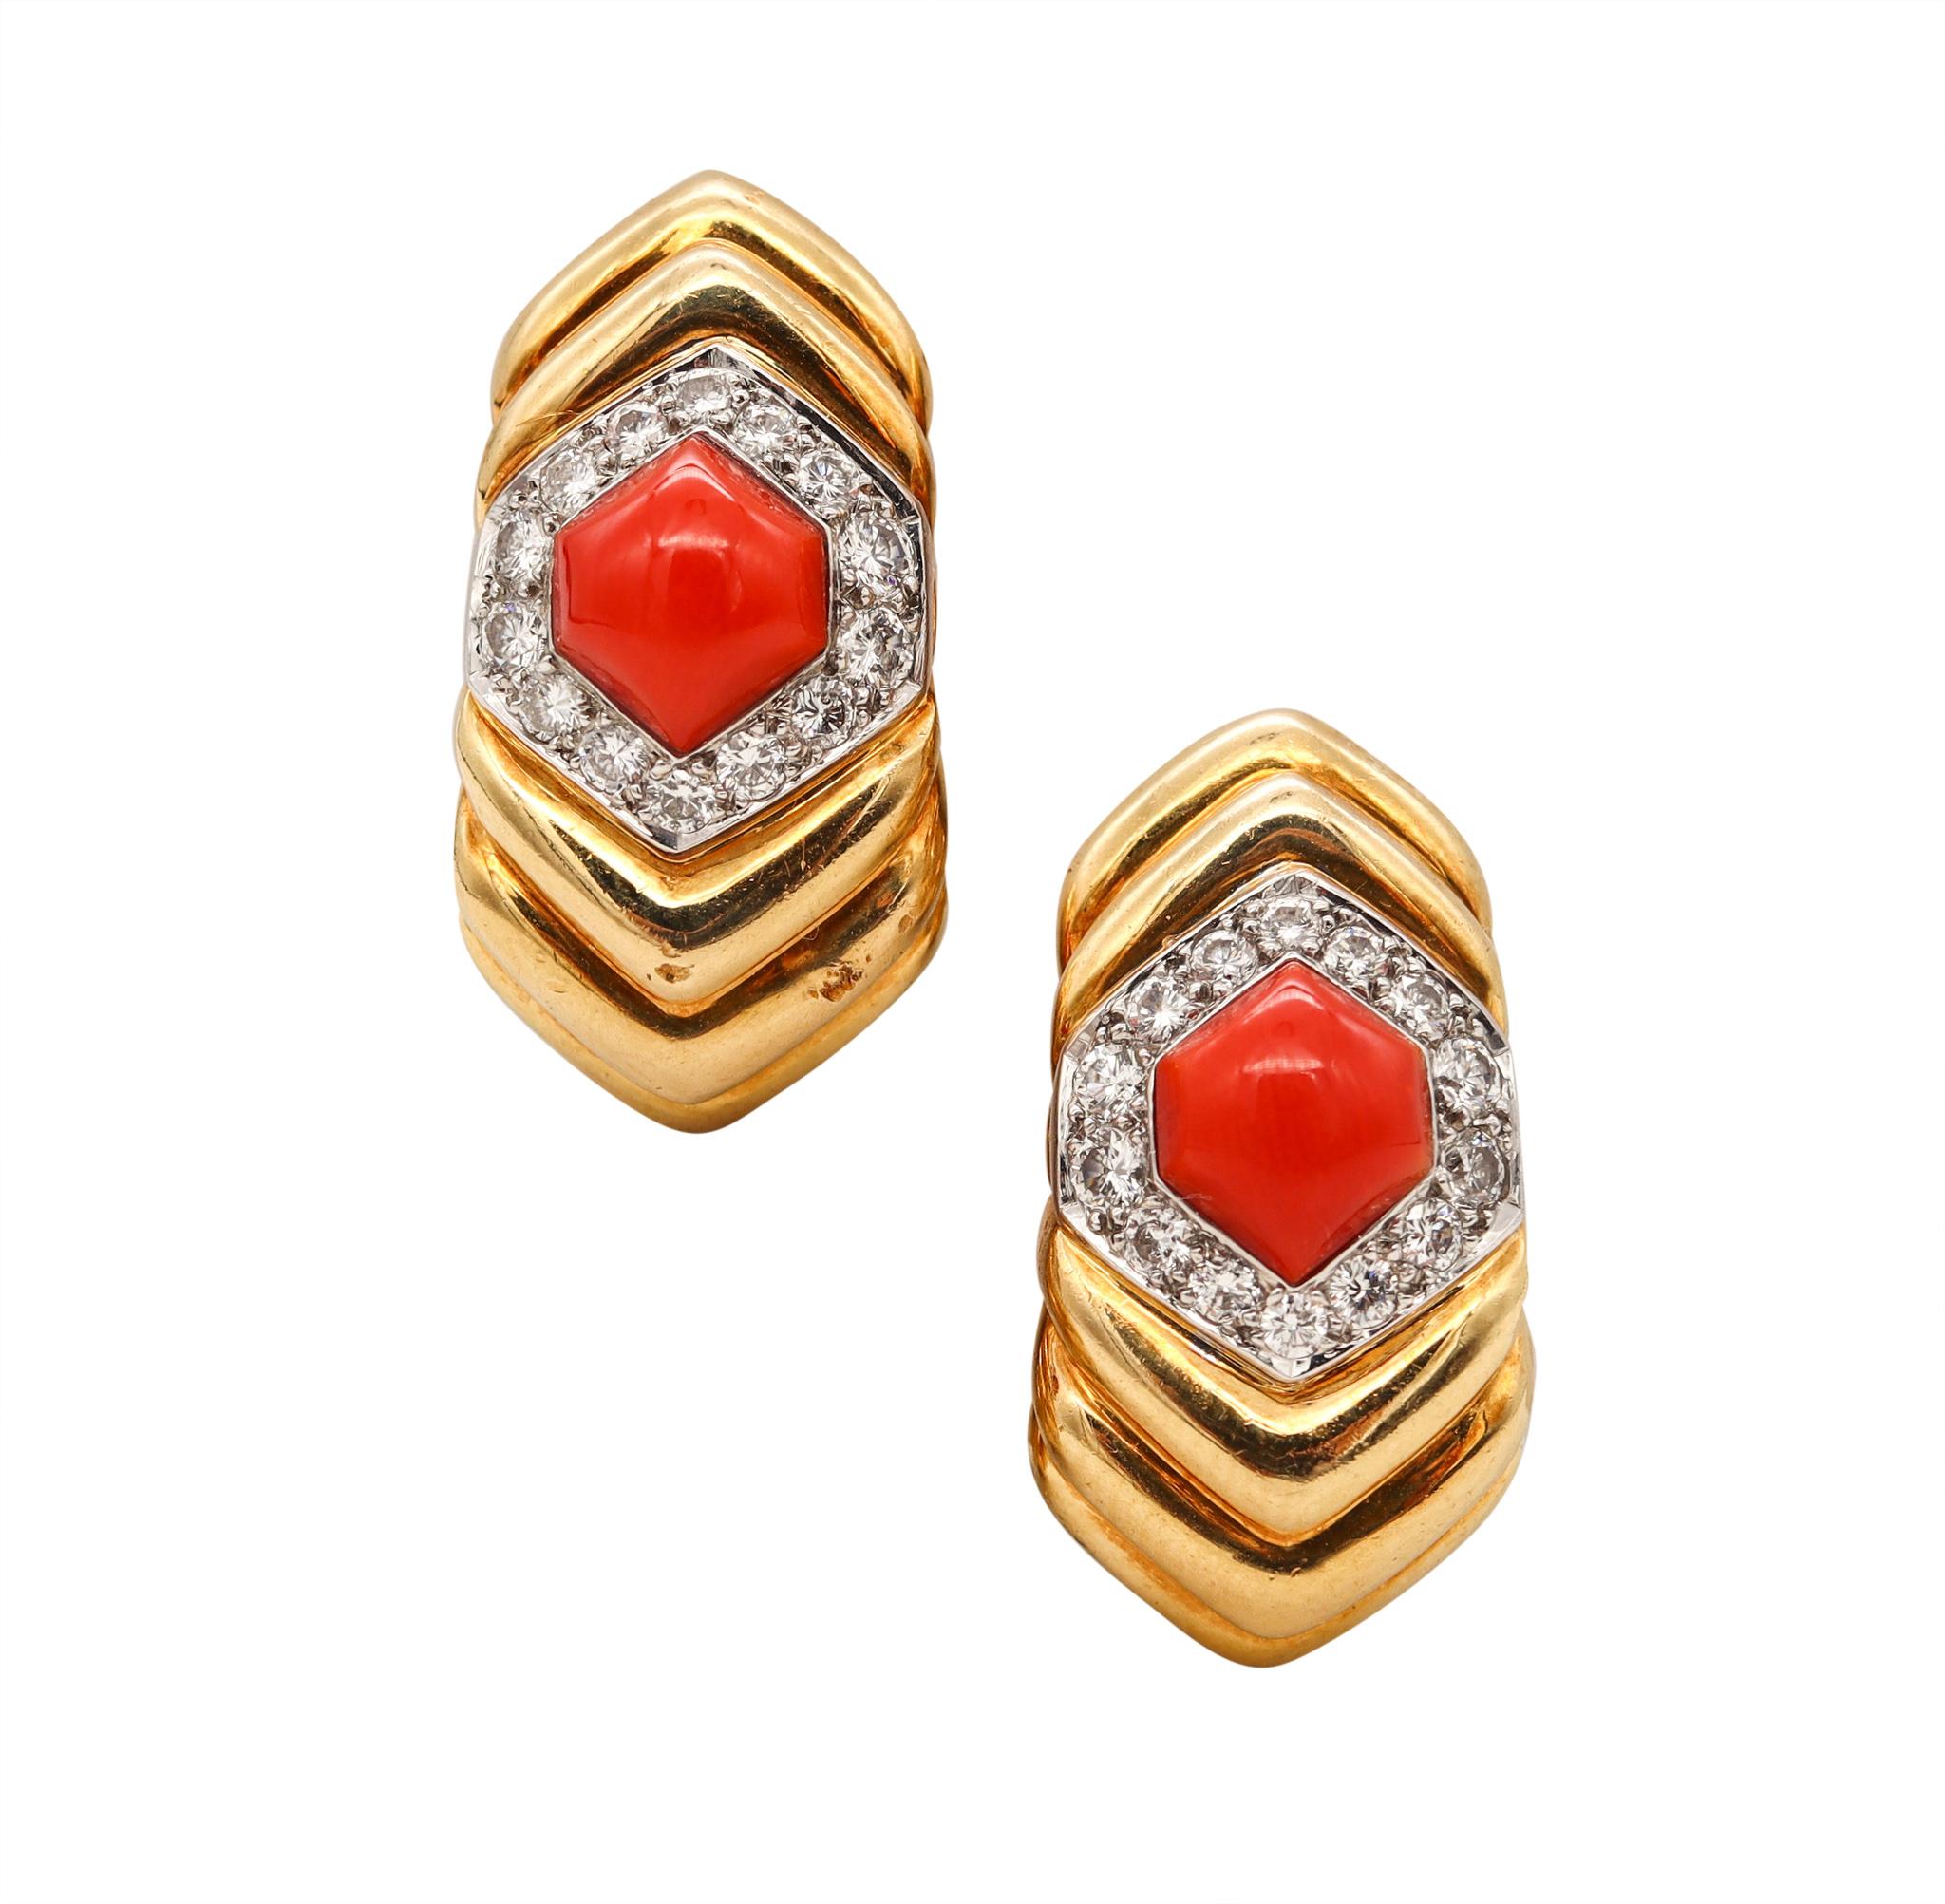 Women's Charles Turi New York Clip on Earrings 18kt Gold 5.96 Cts in Diamonds and Corals